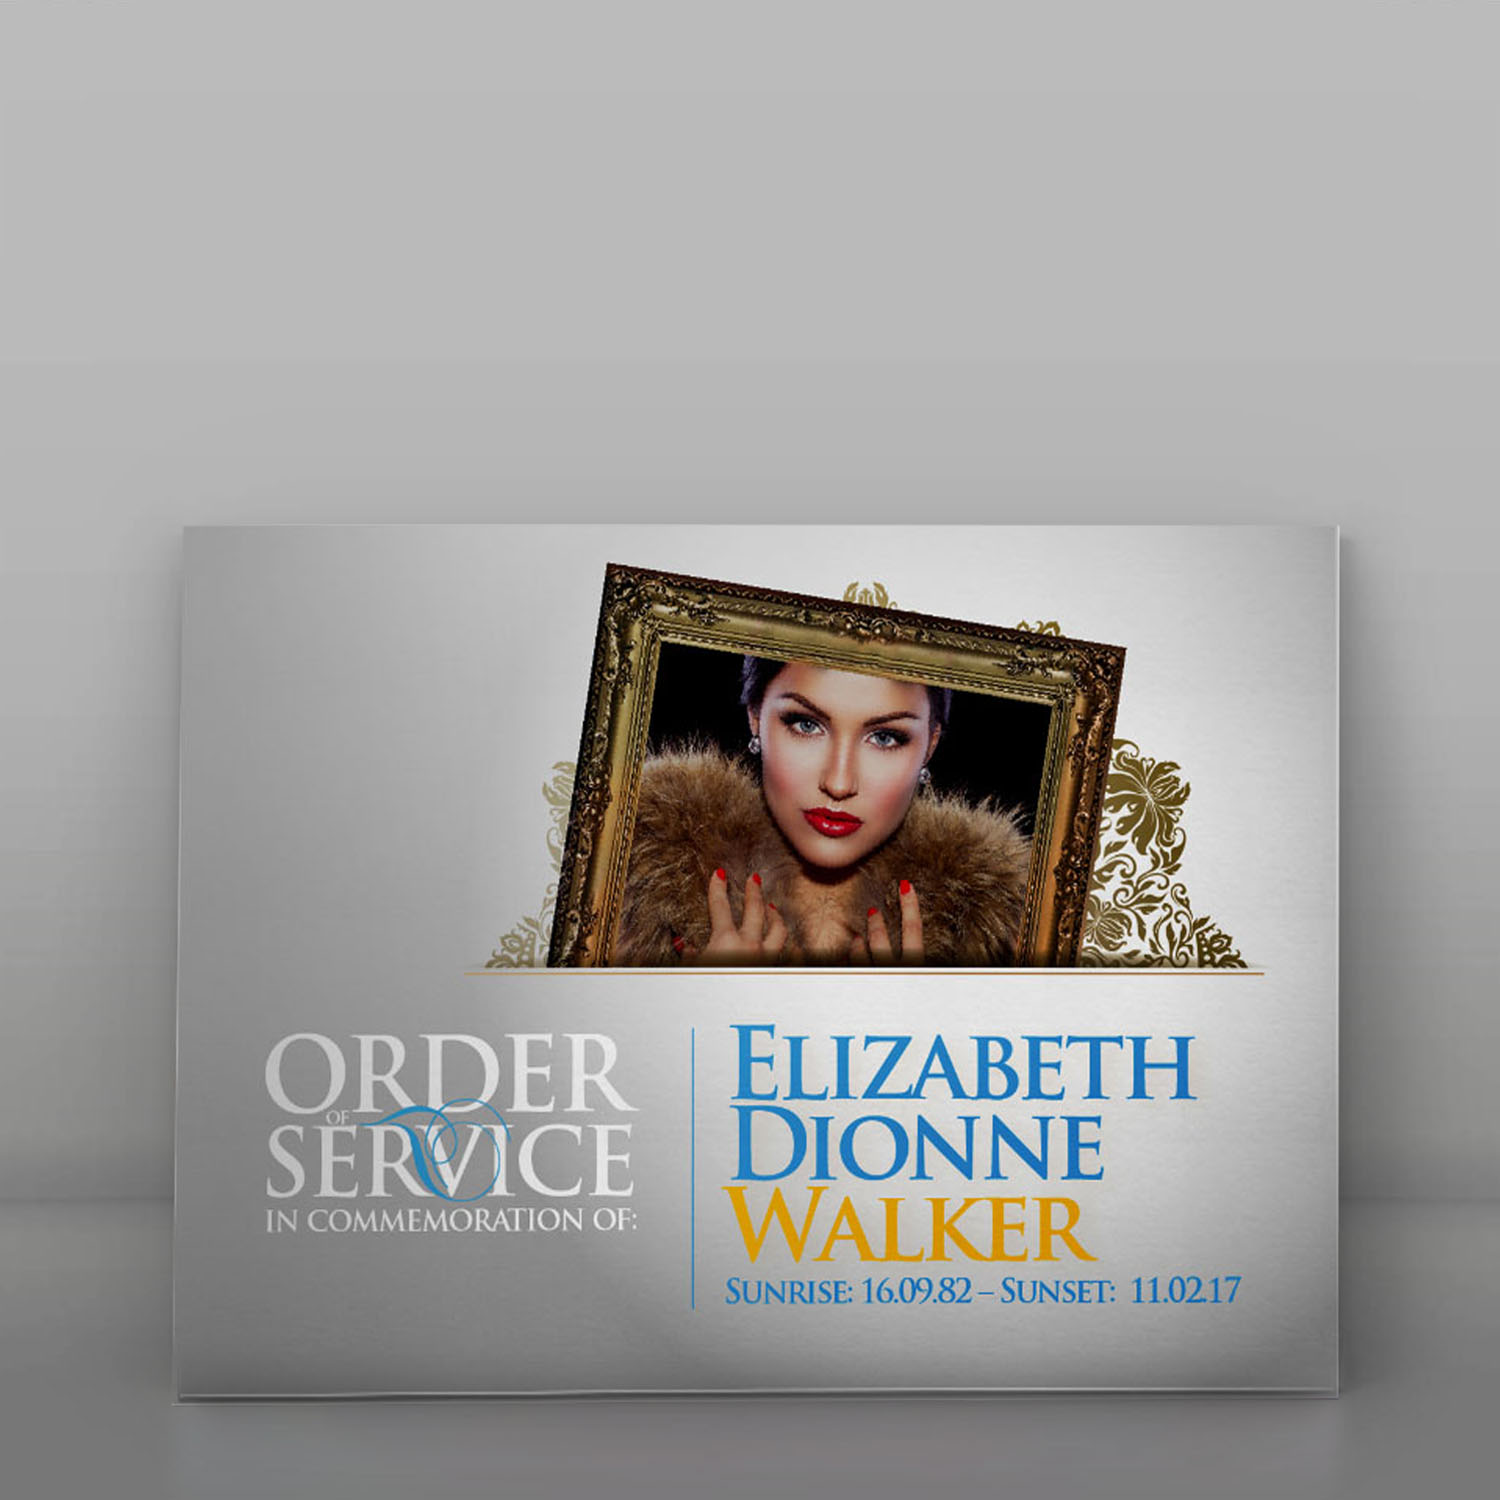 Funeral booklet design, funeral booklet print, order of service booklet, order of service print, funeral booklet themes, templates, memorial booklet, funeral programme, funeral printing, funeral order of service booklets design and print, memories funeral booklets, memories funeral booklets, obituary, funeral banner, funeral bookmark, motion gallery, UK nationwide delivery